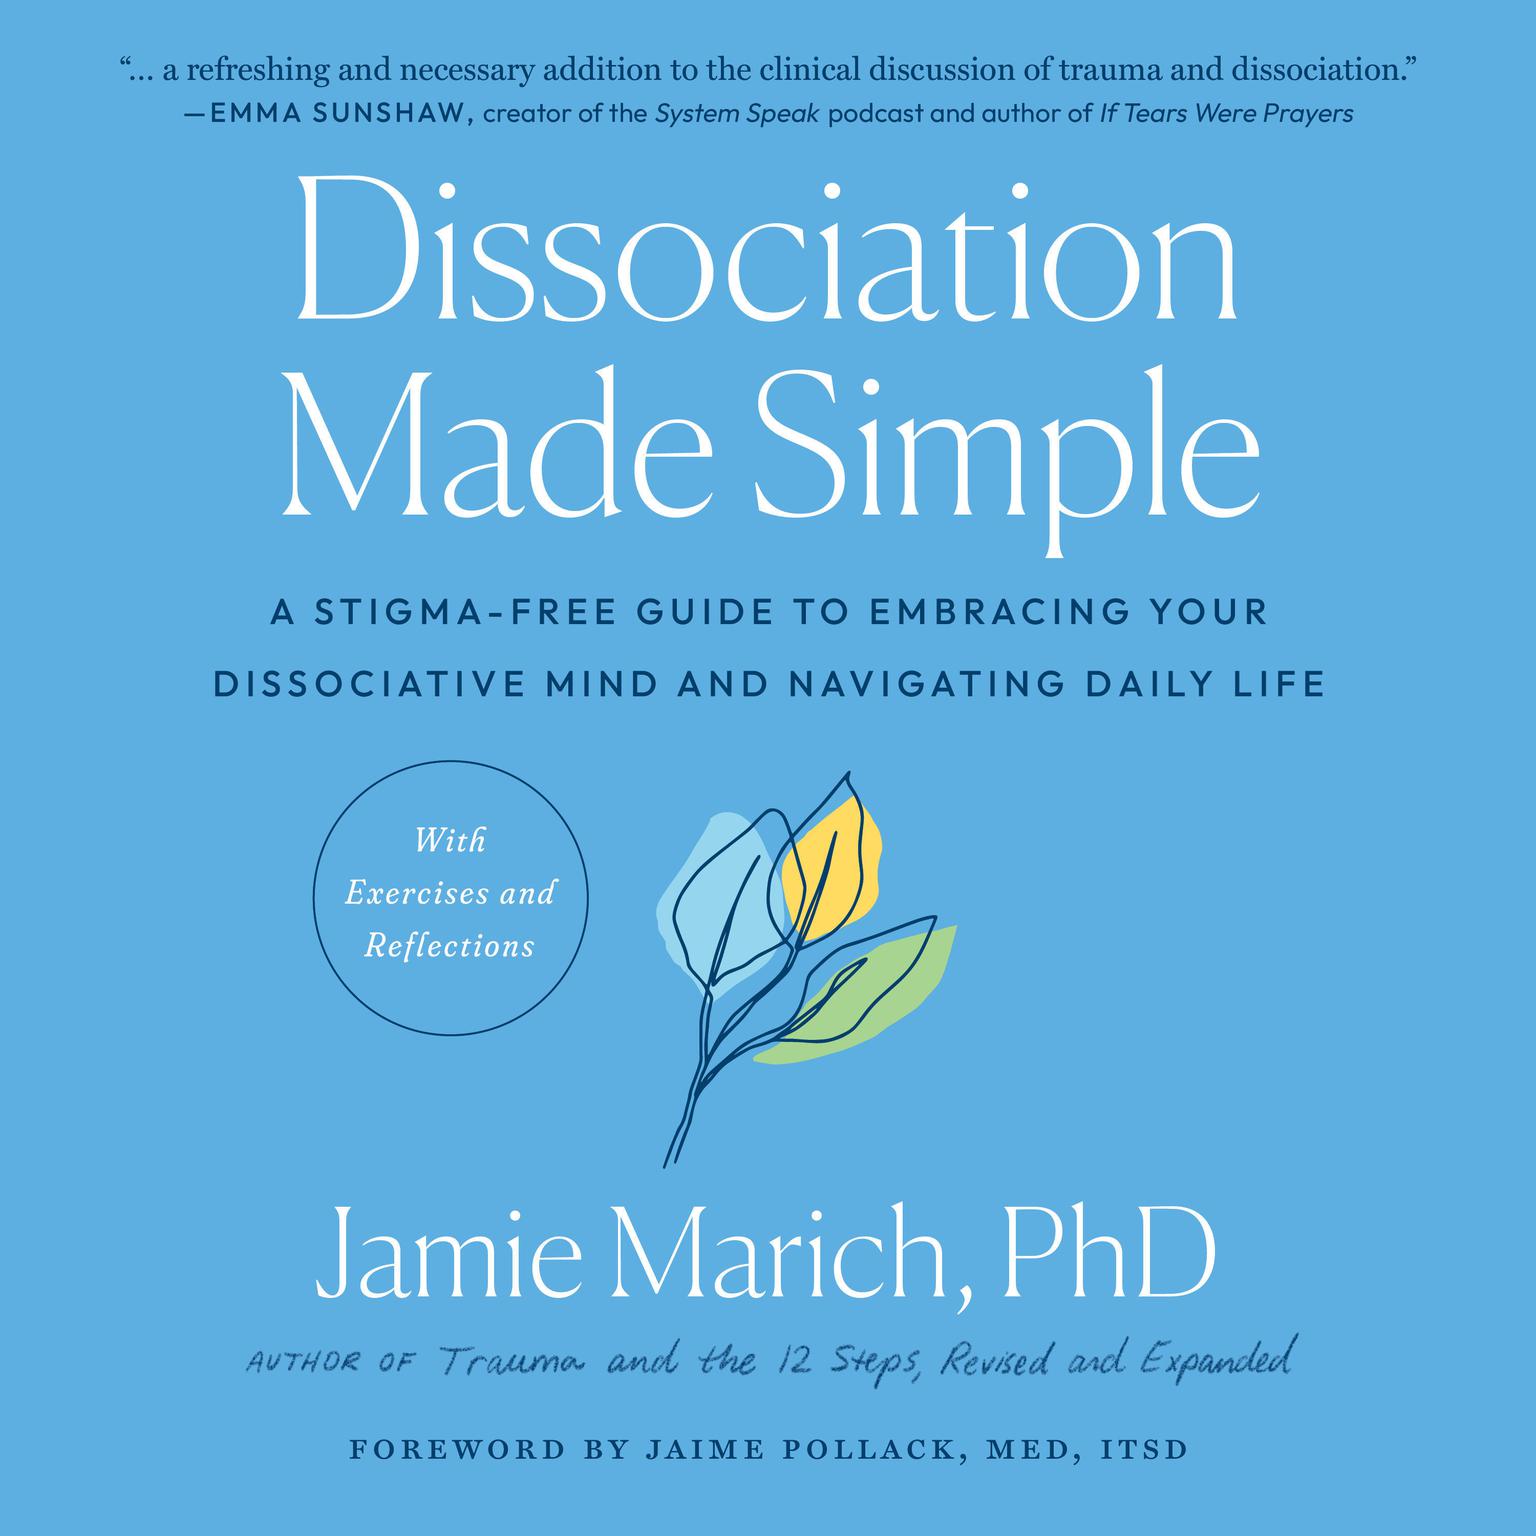 Dissociation Made Simple: A Stigma-Free Guide to Embracing Your Dissociative Mind and Navigating Daily Life Audiobook, by Jamie Marich